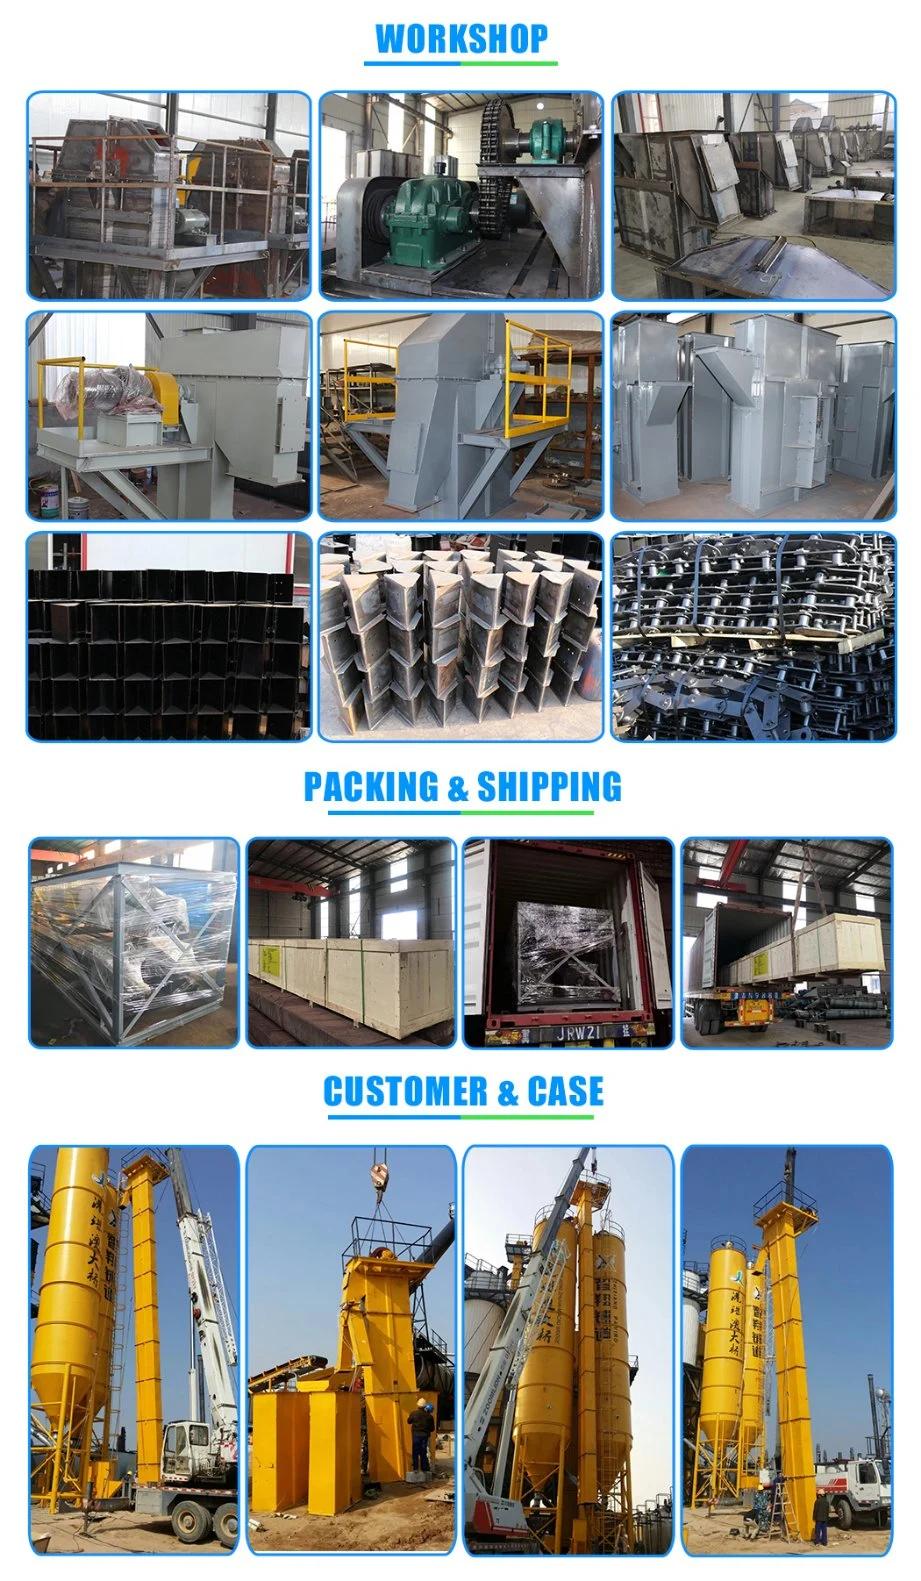 Ideal New Conveying Equipment Chain Bucket Elevator for Transforring Bulk Material